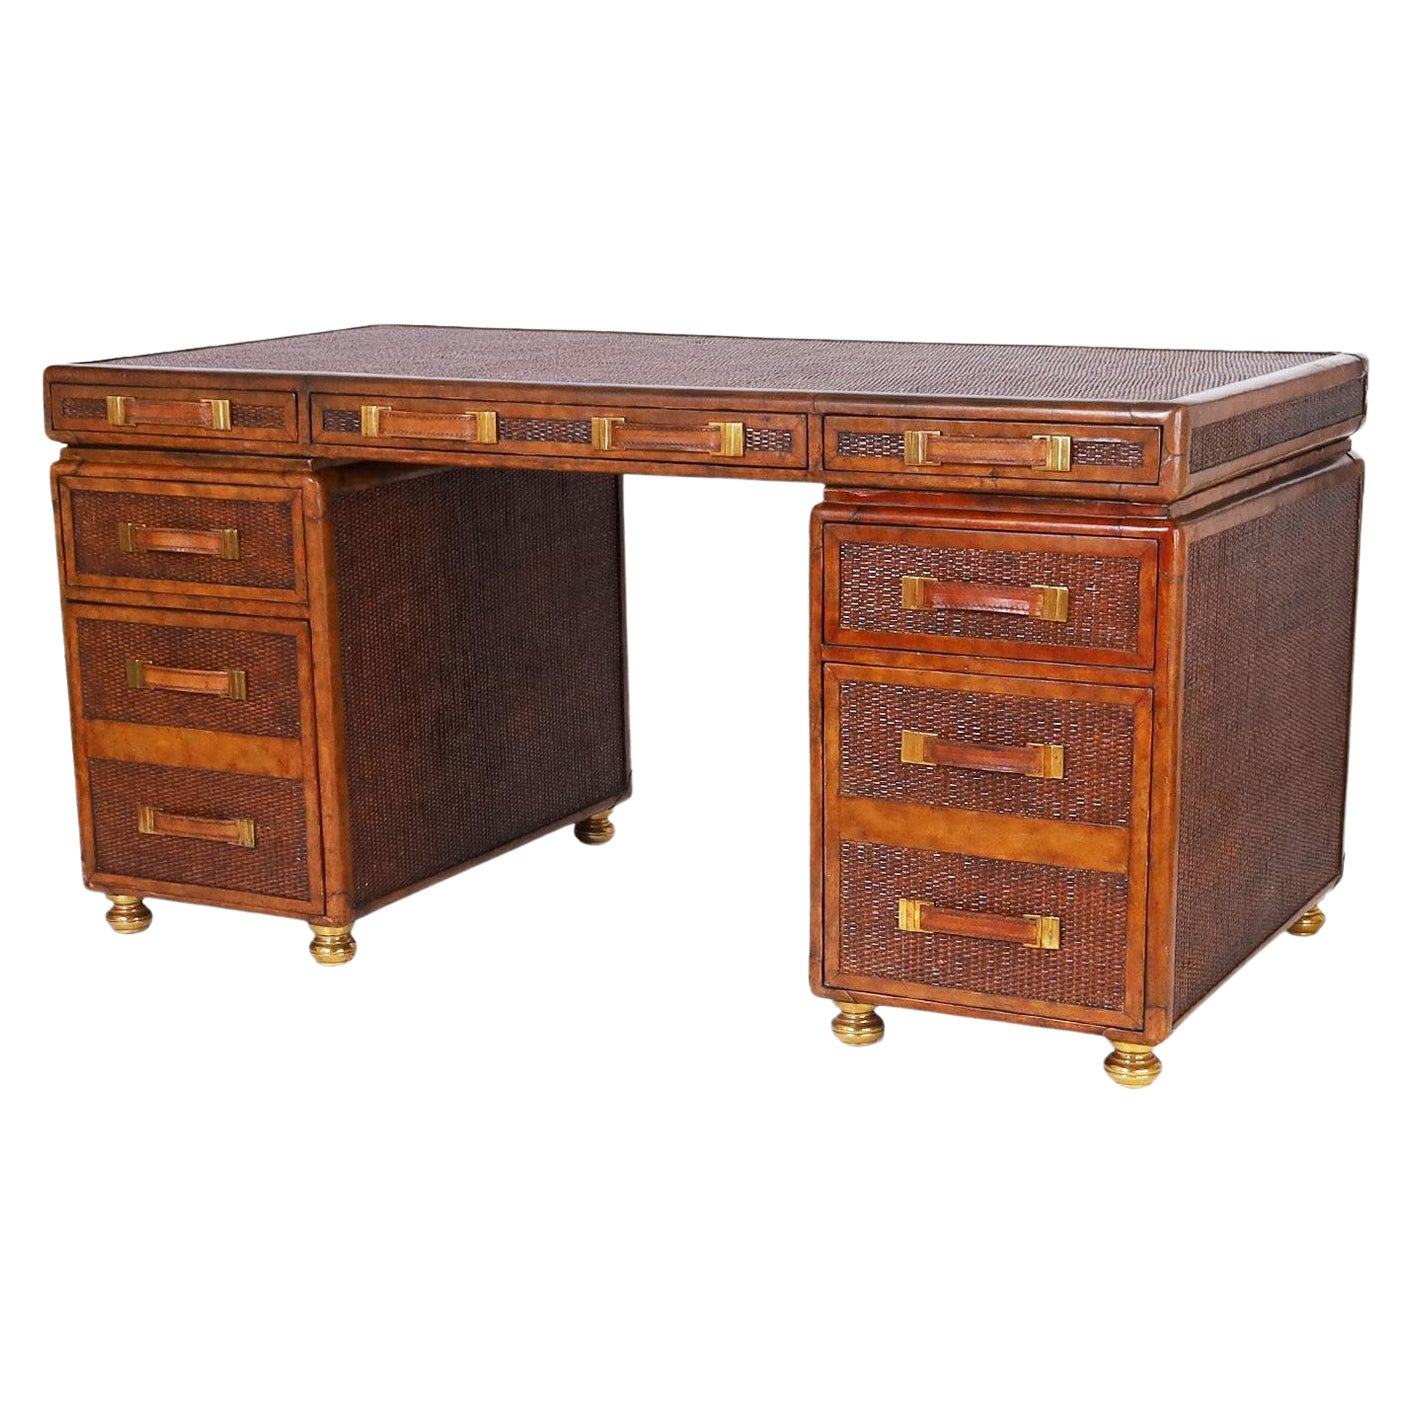 British Colonial Style Grasscloth and Mahogany Desk For Sale